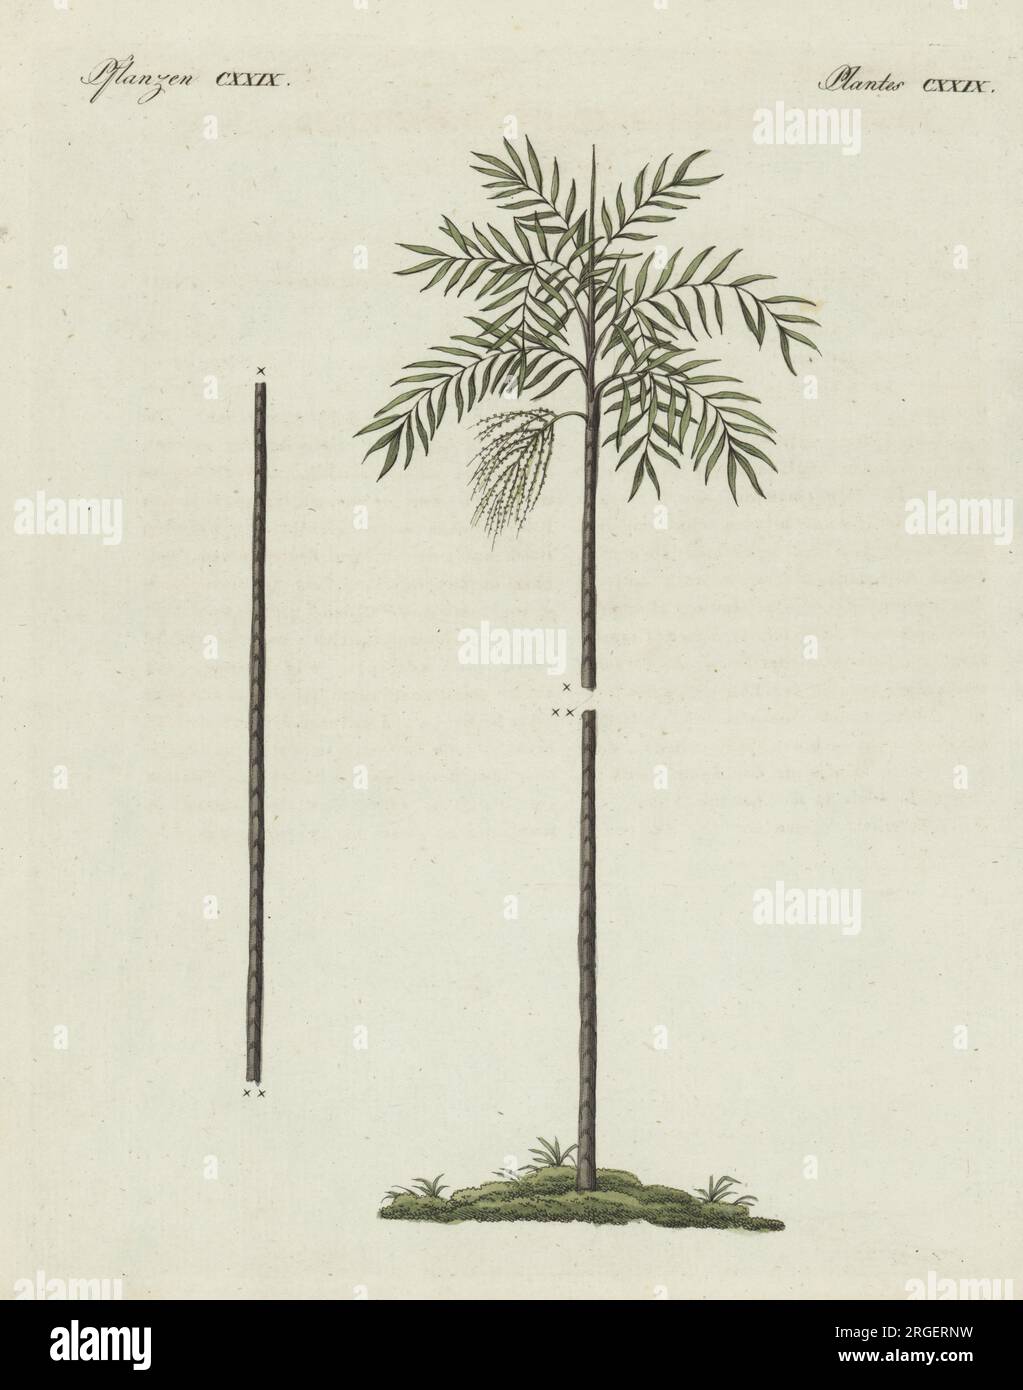 Wendlandiella gracilis palm tree of South America. Ptychosperma gracilis. The botanicals were drawn by Henriette and Conrad Westermayr, F. Götz and C. Ermer. Handcoloured copperplate engraving from Carl Bertuch's Bilderbuch fur Kinder (Picture Book for Children), Weimar, 1810. A 12-volume encyclopedia for children illustrated with almost 1,200 engraved plates on natural history, science, costume, mythology, etc., published from 1790-1830. Stock Photo